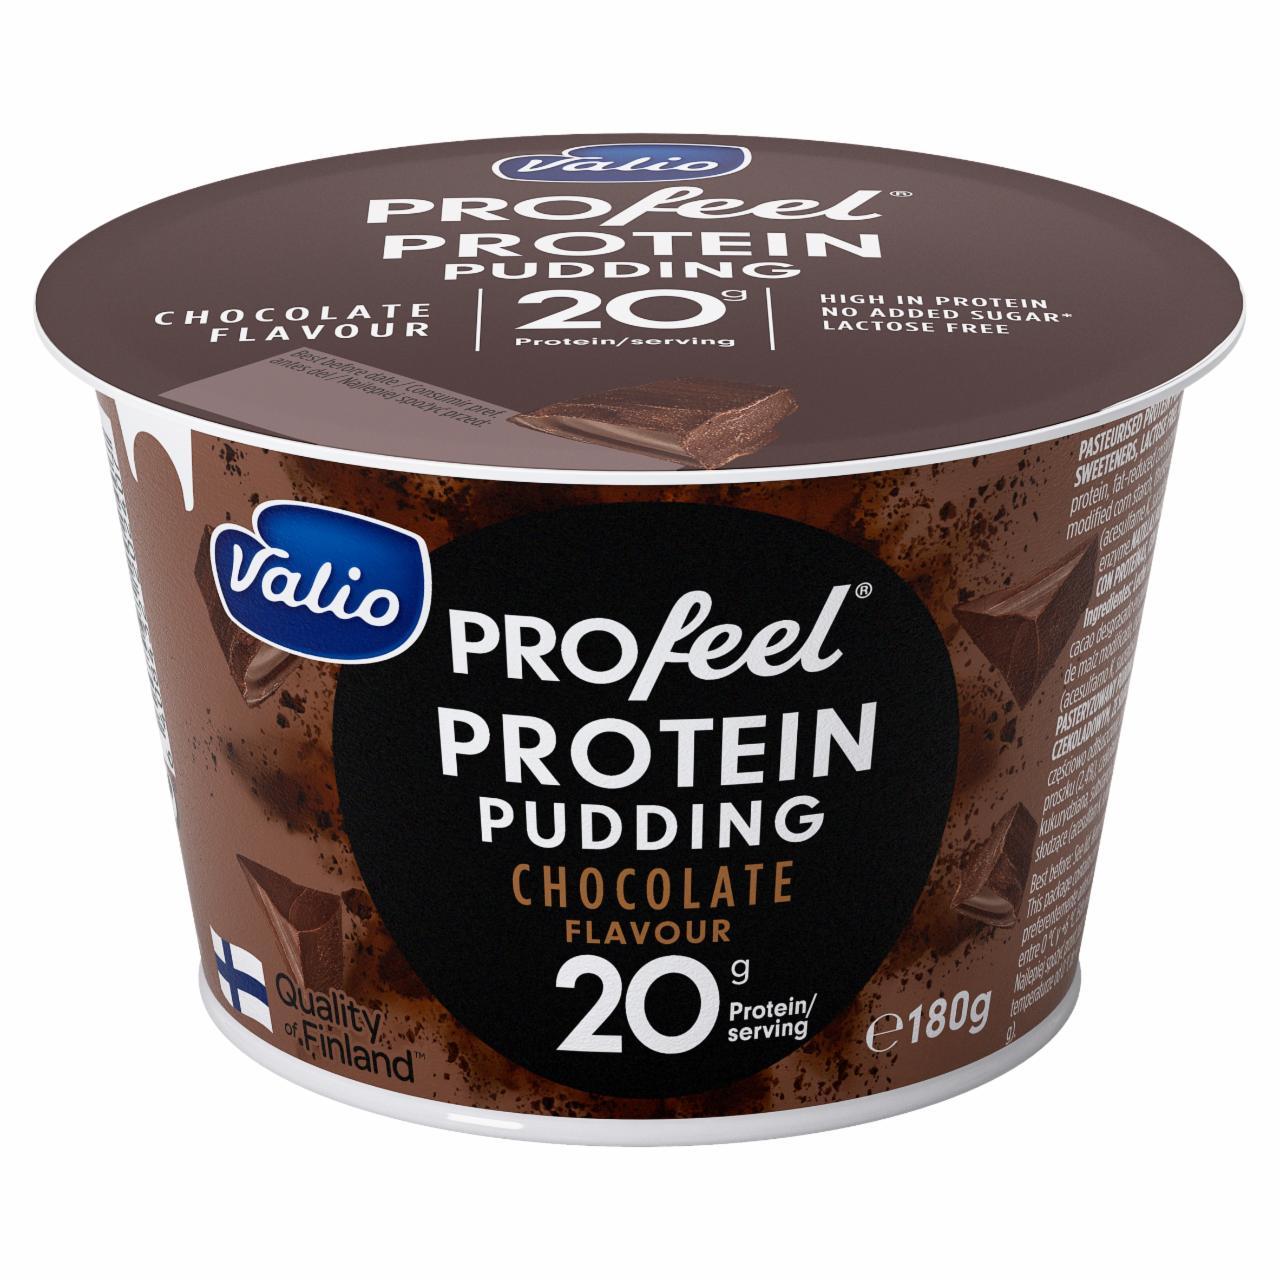 Fotografie - Profeel Proteing Pudding 20g Chocolate flavour Valio